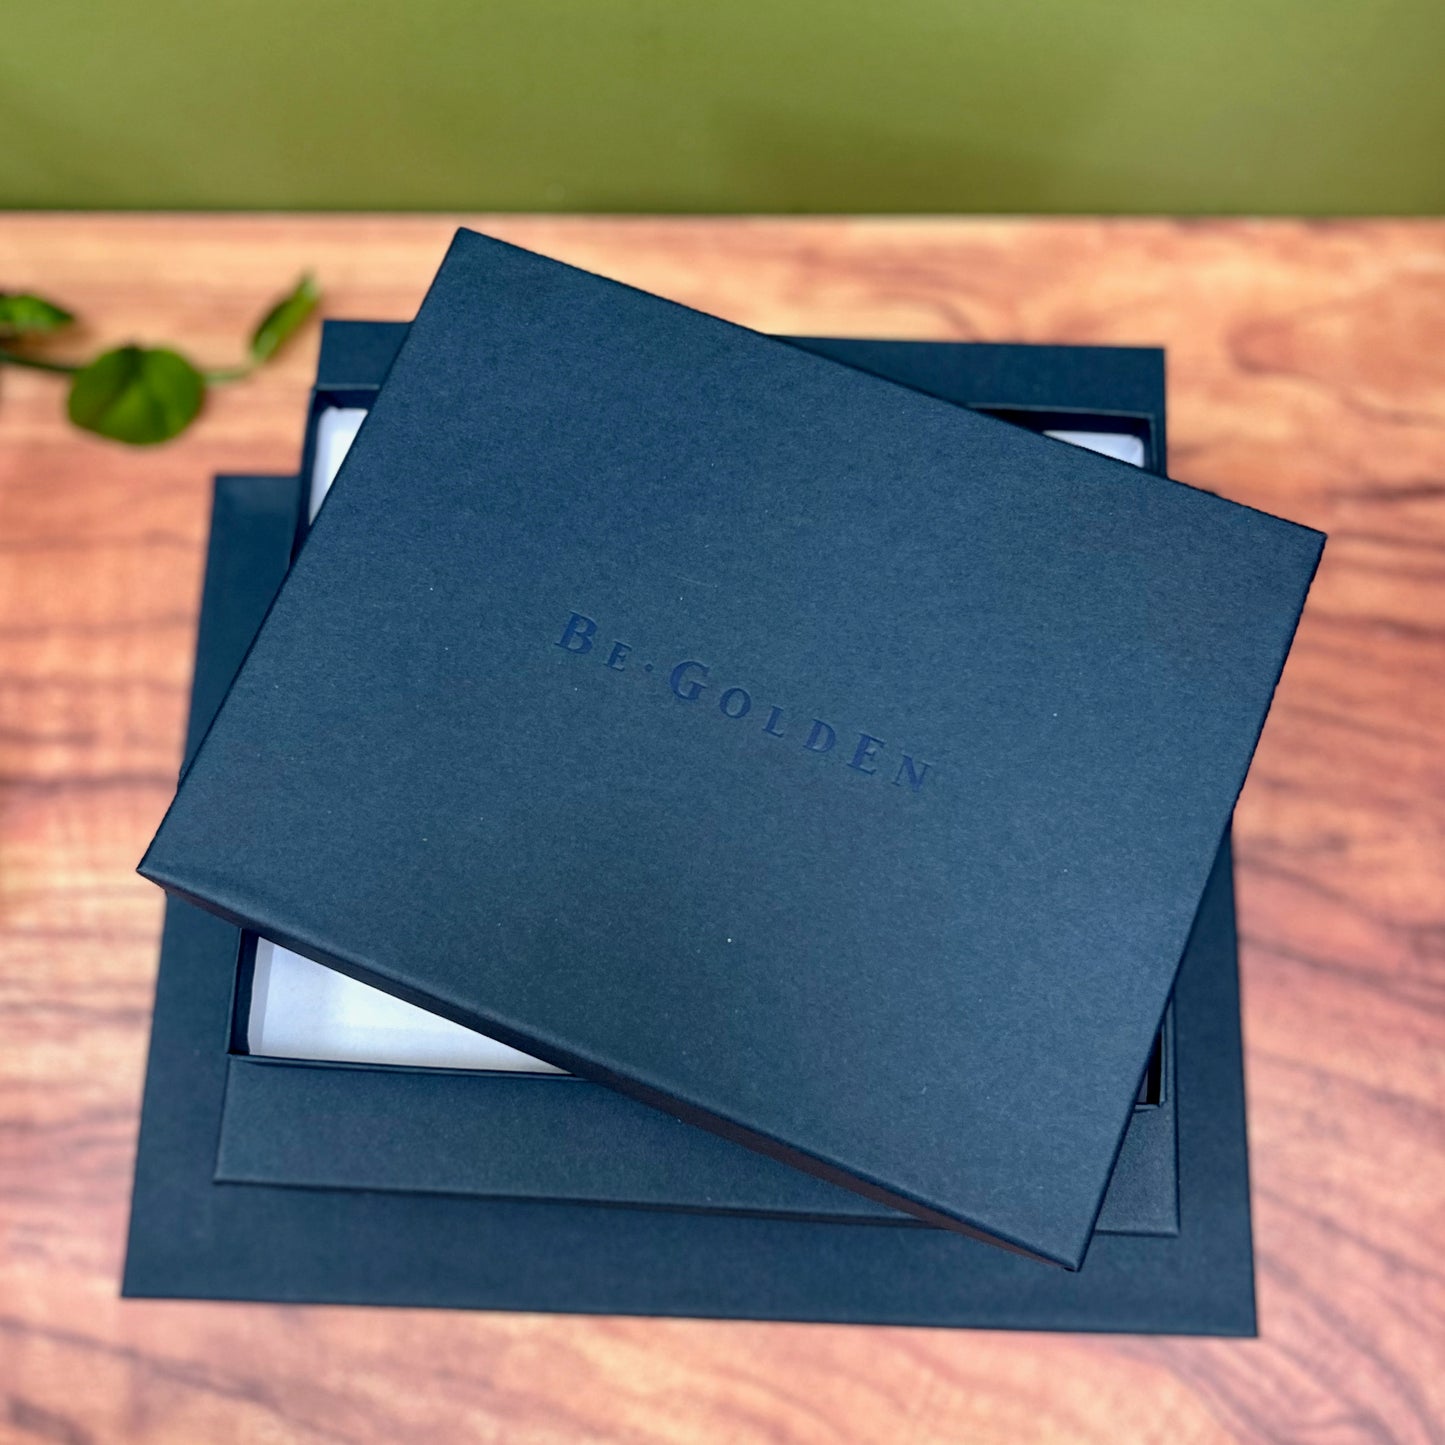 on a table is a pile of presentation boxes that are navy blue in colour and have begolden branding embossed on the front 